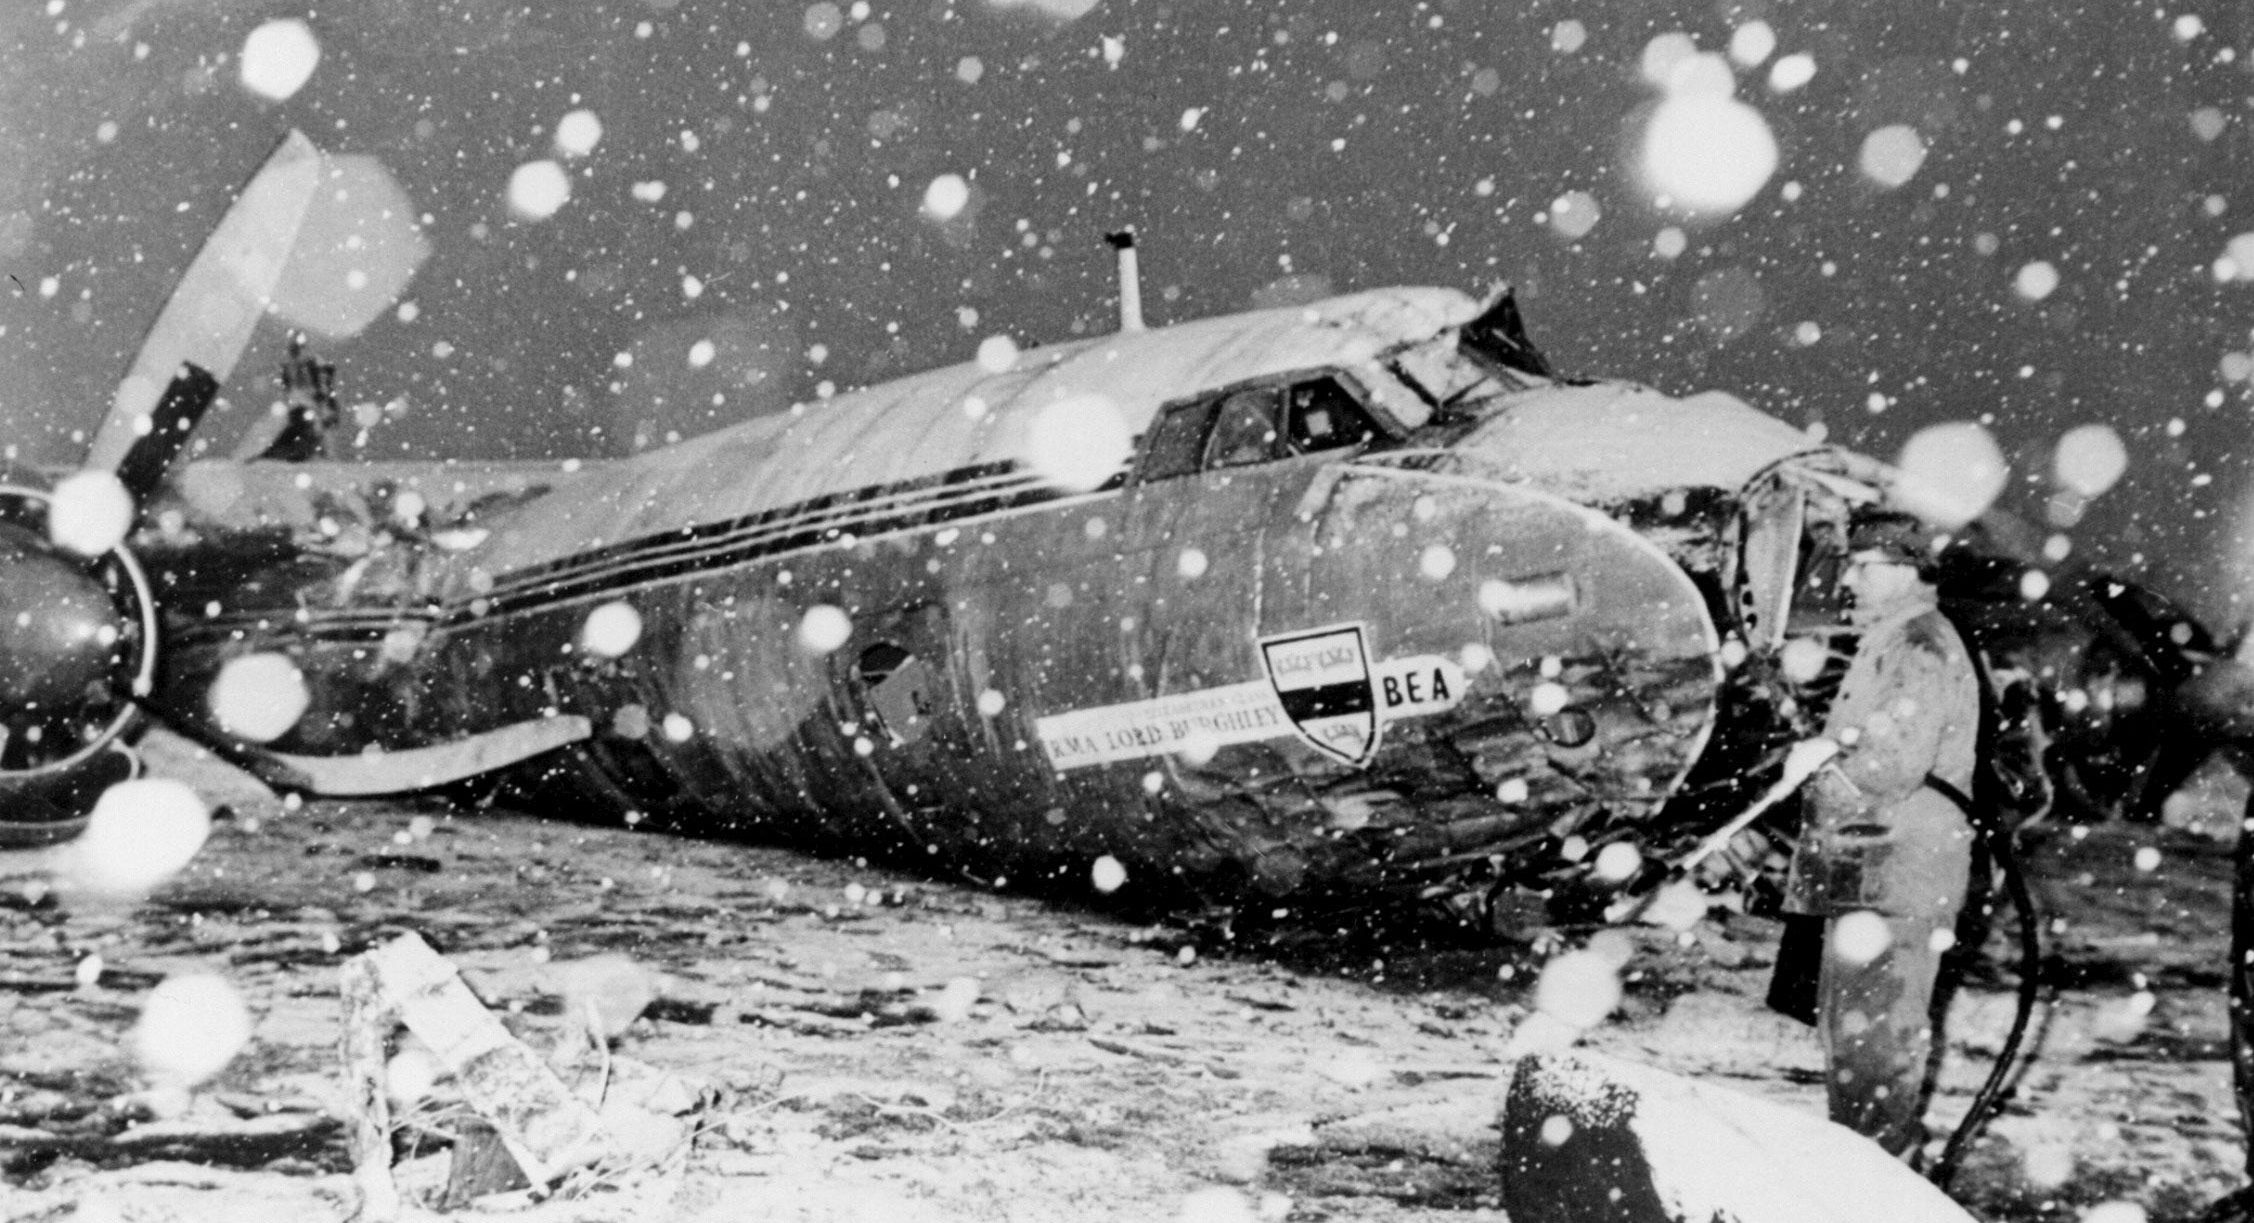 The wreckage of the British European Airways plane which crashed in Munich on February 6, 1958, while bringing home members of the Manchester United football team from a European Cup match.